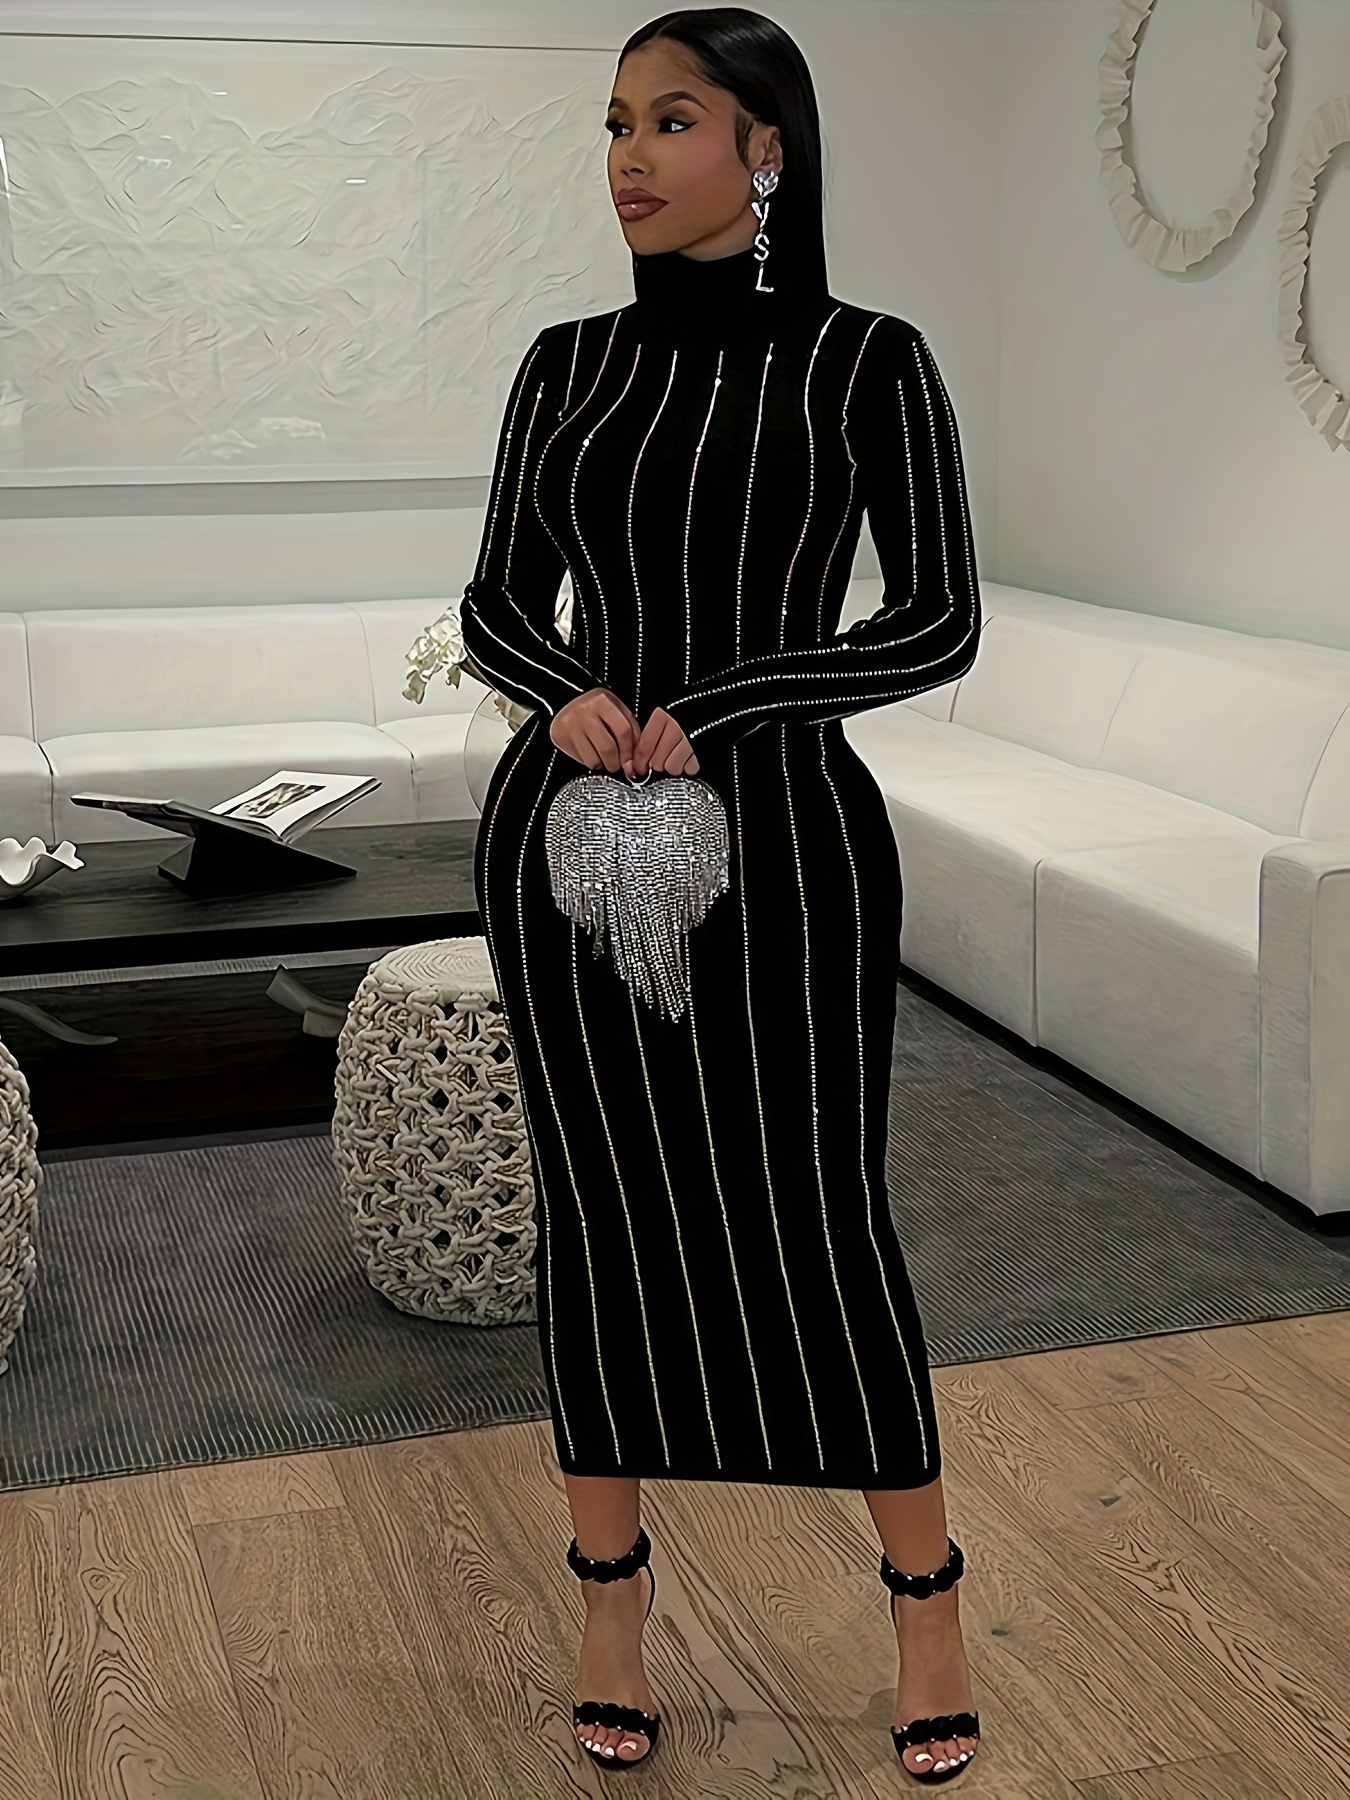 rhinestone long sleeve bodycon black dress elegant high neck solid color party club evening long dresses streetwear for fall winter womens clothing